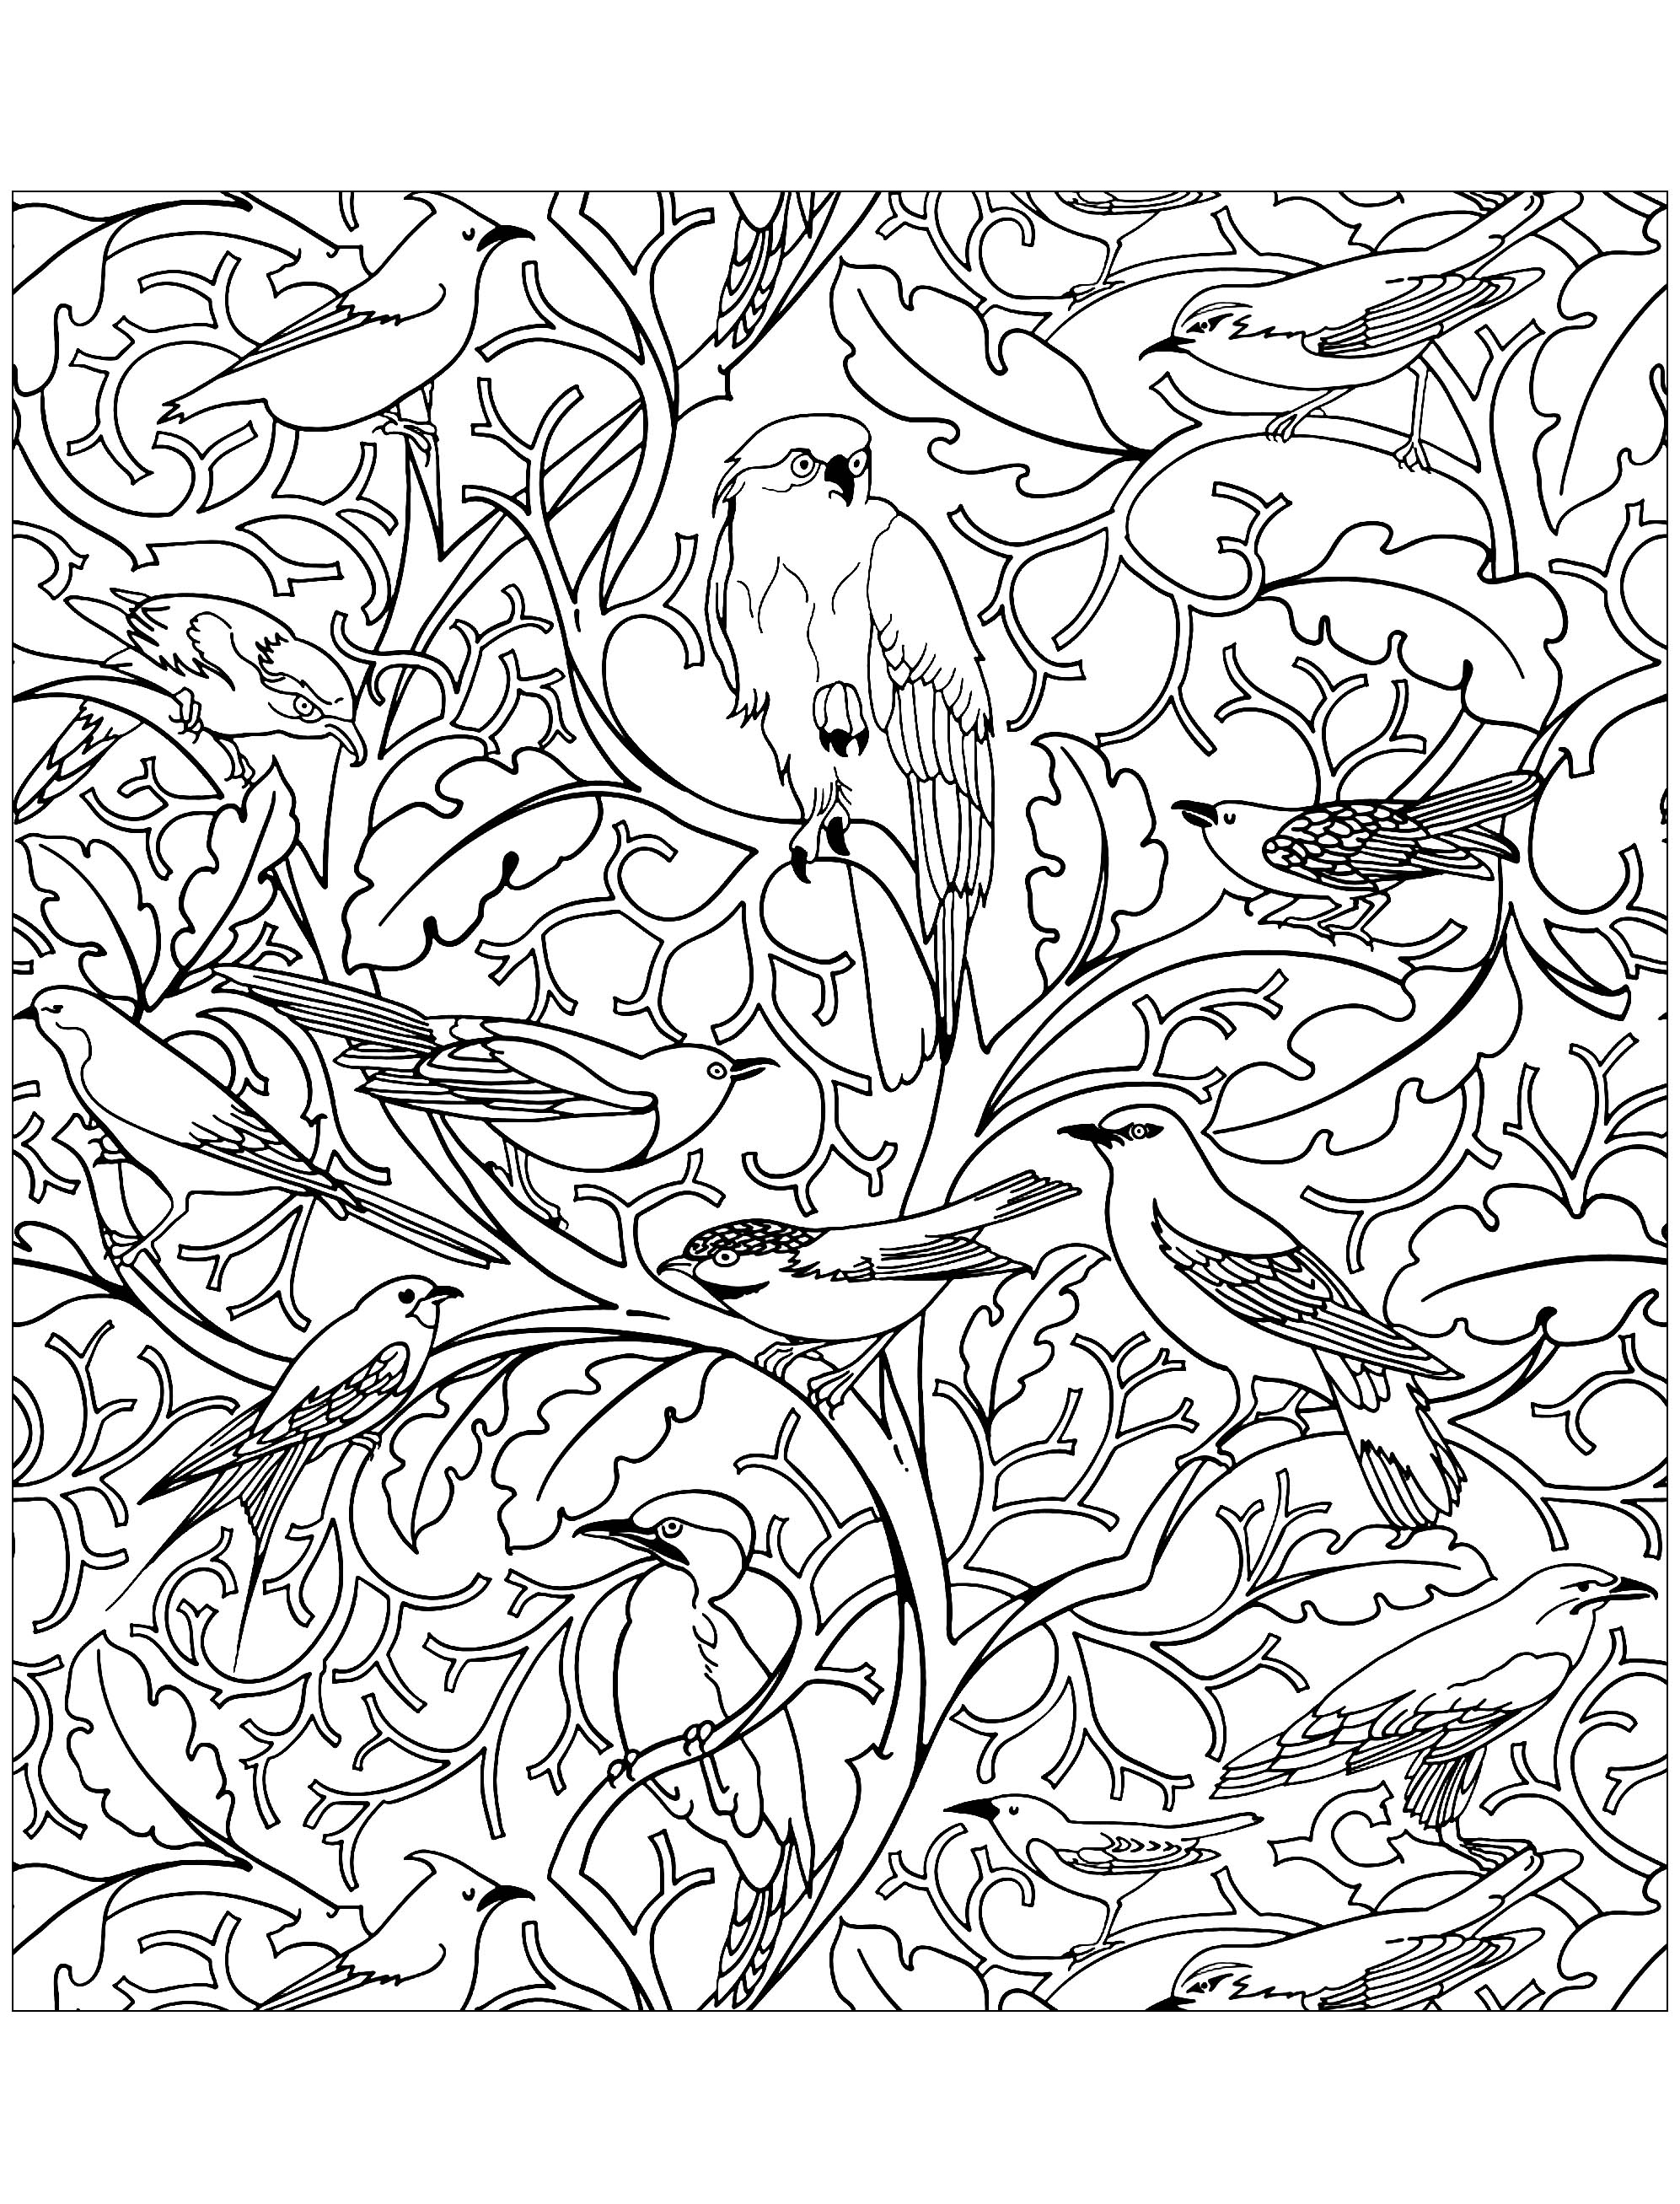 Coloring page inspired by a textile design (also used as wallpaper) : Pop Mob Scene by CFA Voysey (England, 1929)